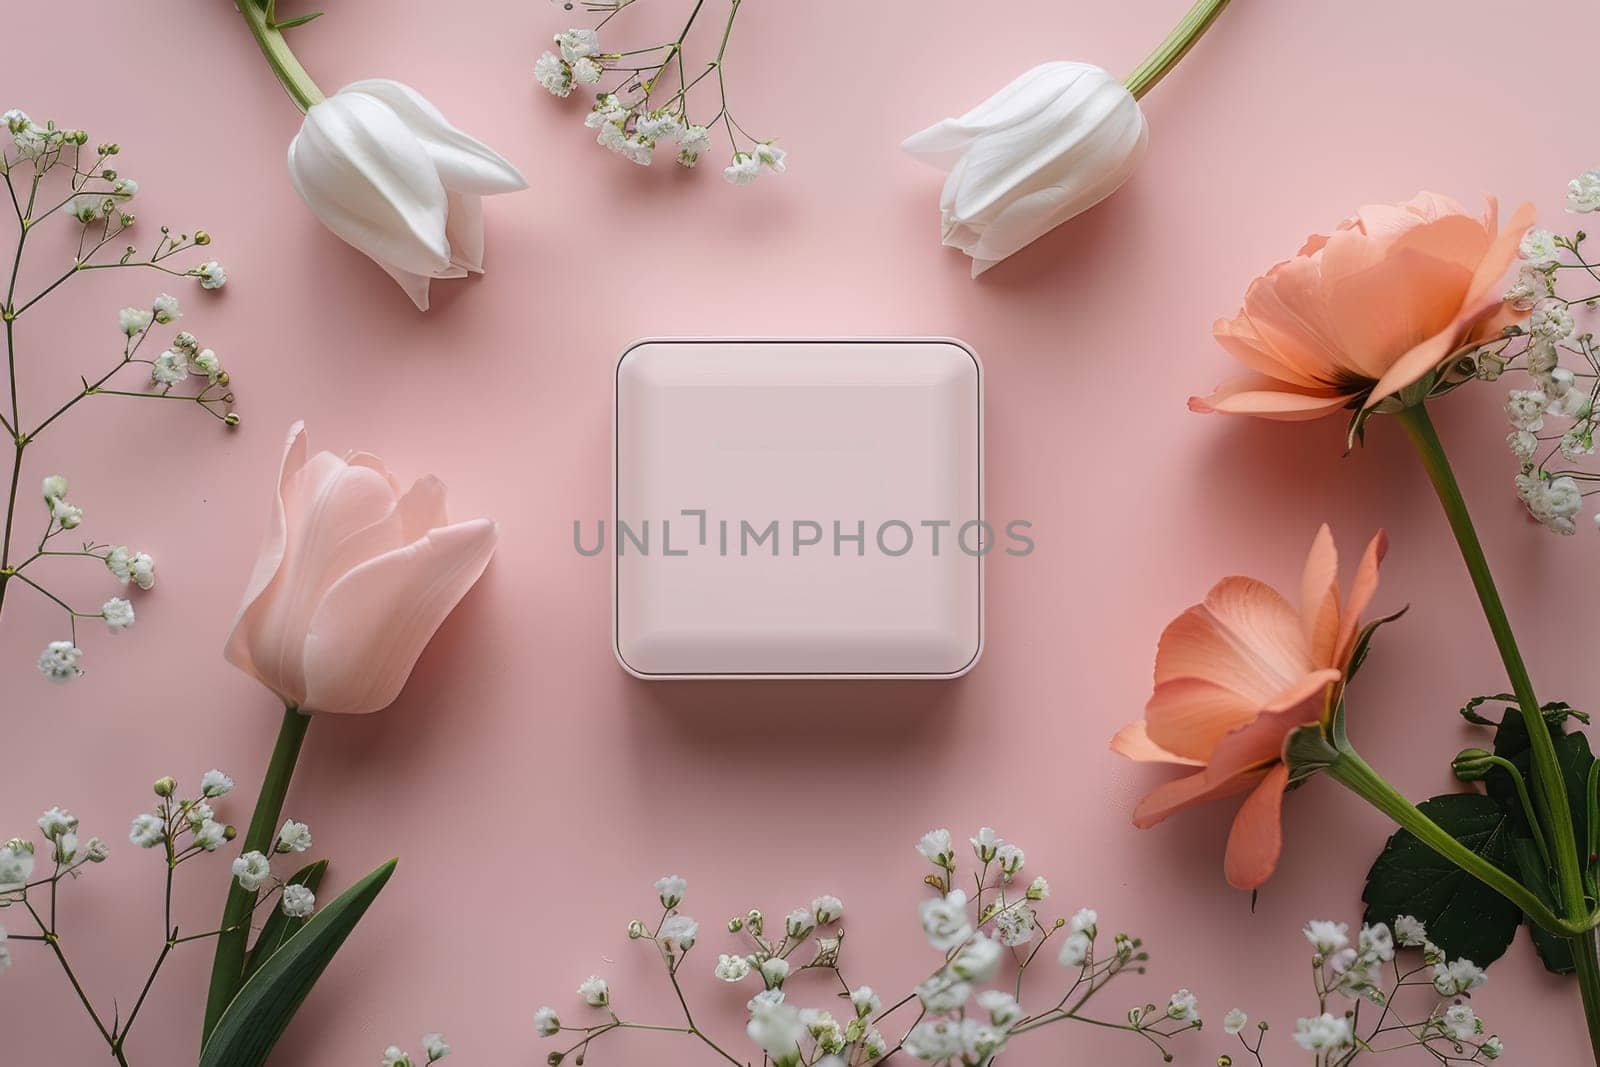 A white box with a pink background and a rose on it. The box is a small device that is likely a phone or a tablet. The pink background and the rose suggest a romantic or feminine theme